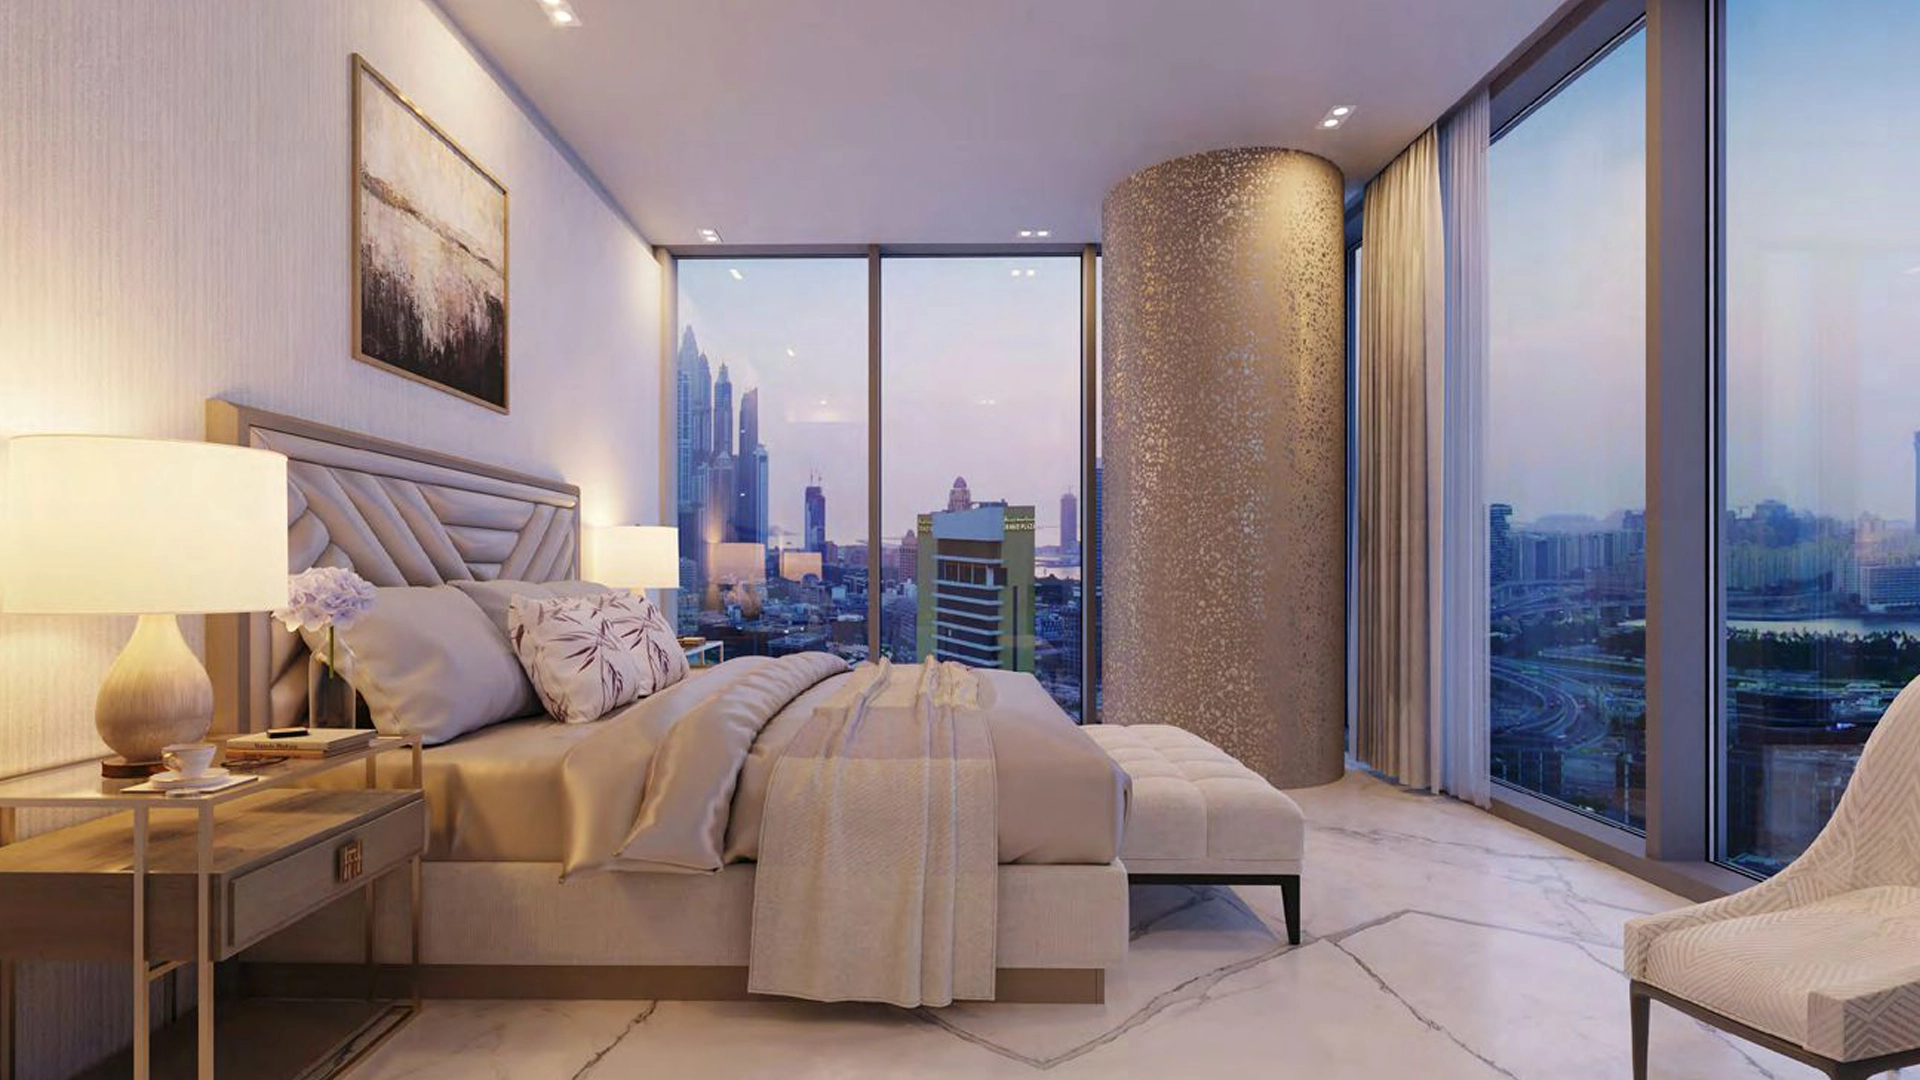 Edge-Realty-4 Beroom penthouse For sale in The S Tower, Dubai Internet City